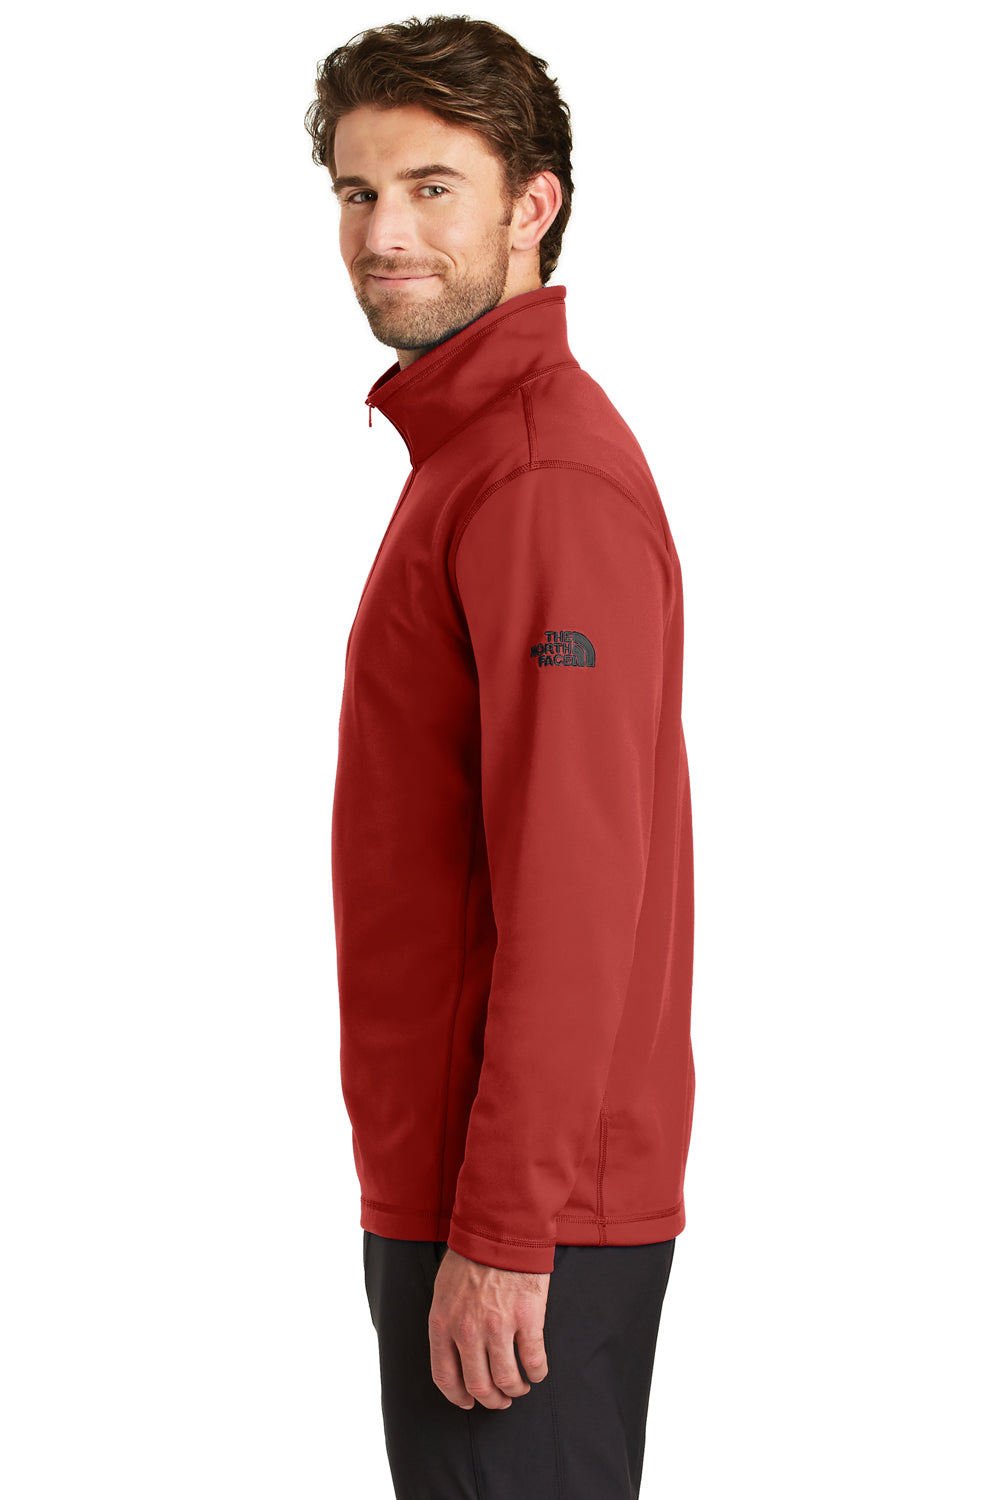 The North Face NF0A3LHB Mens Tech 1/4 Zip Fleece Jacket Cardinal Red Side